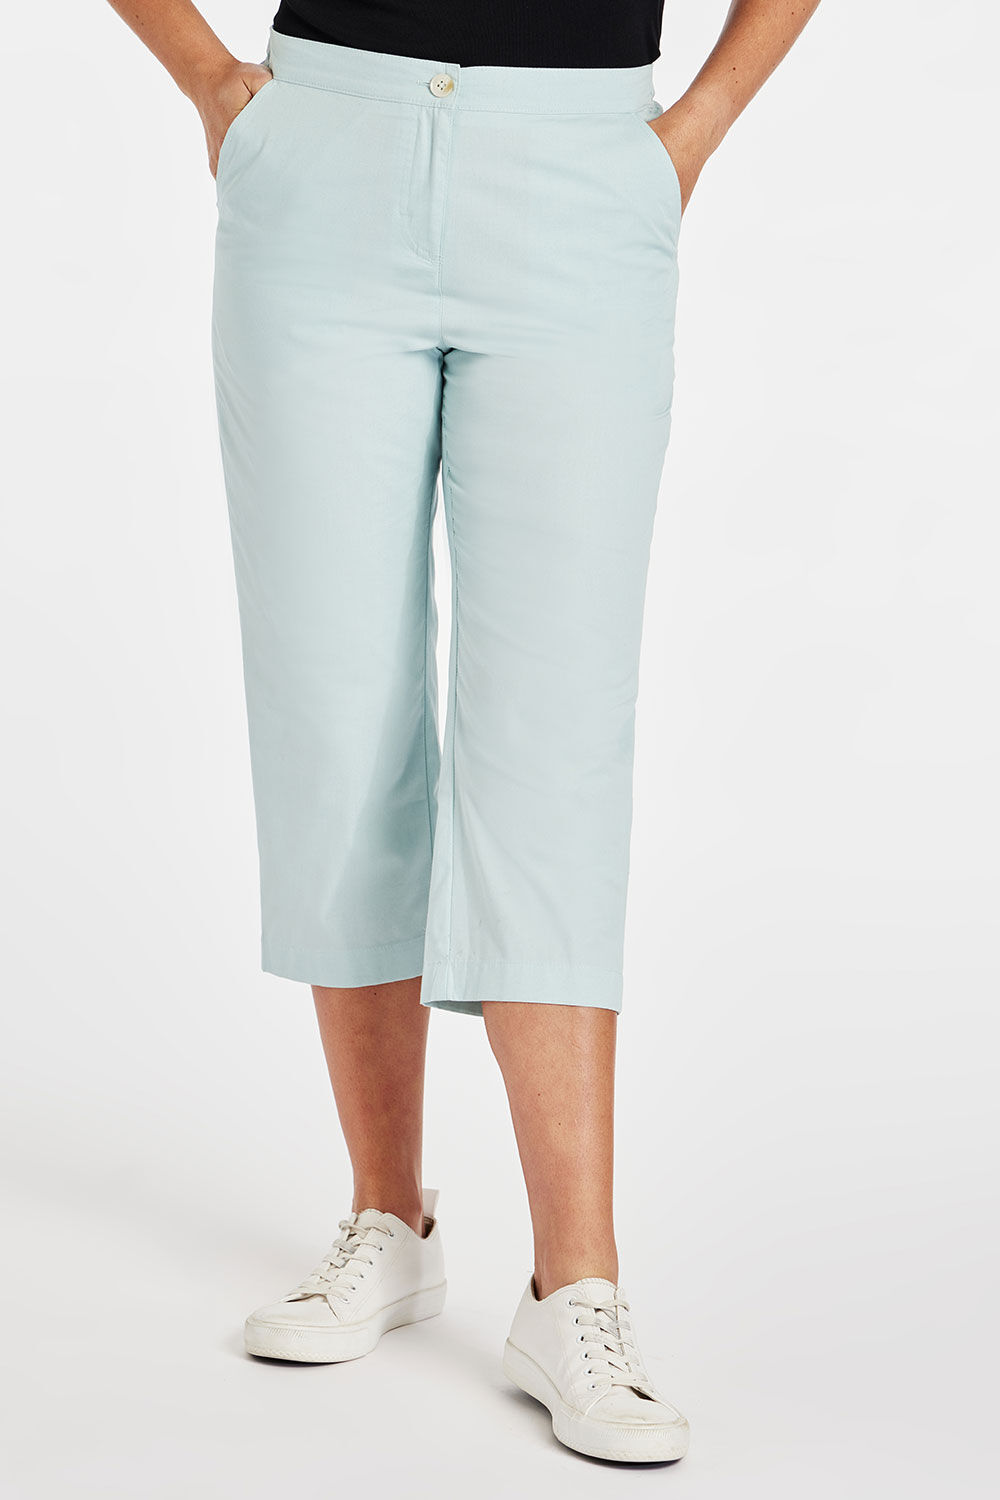 Bonmarche Sage Cropped Elasticated Trousers, Size: 16